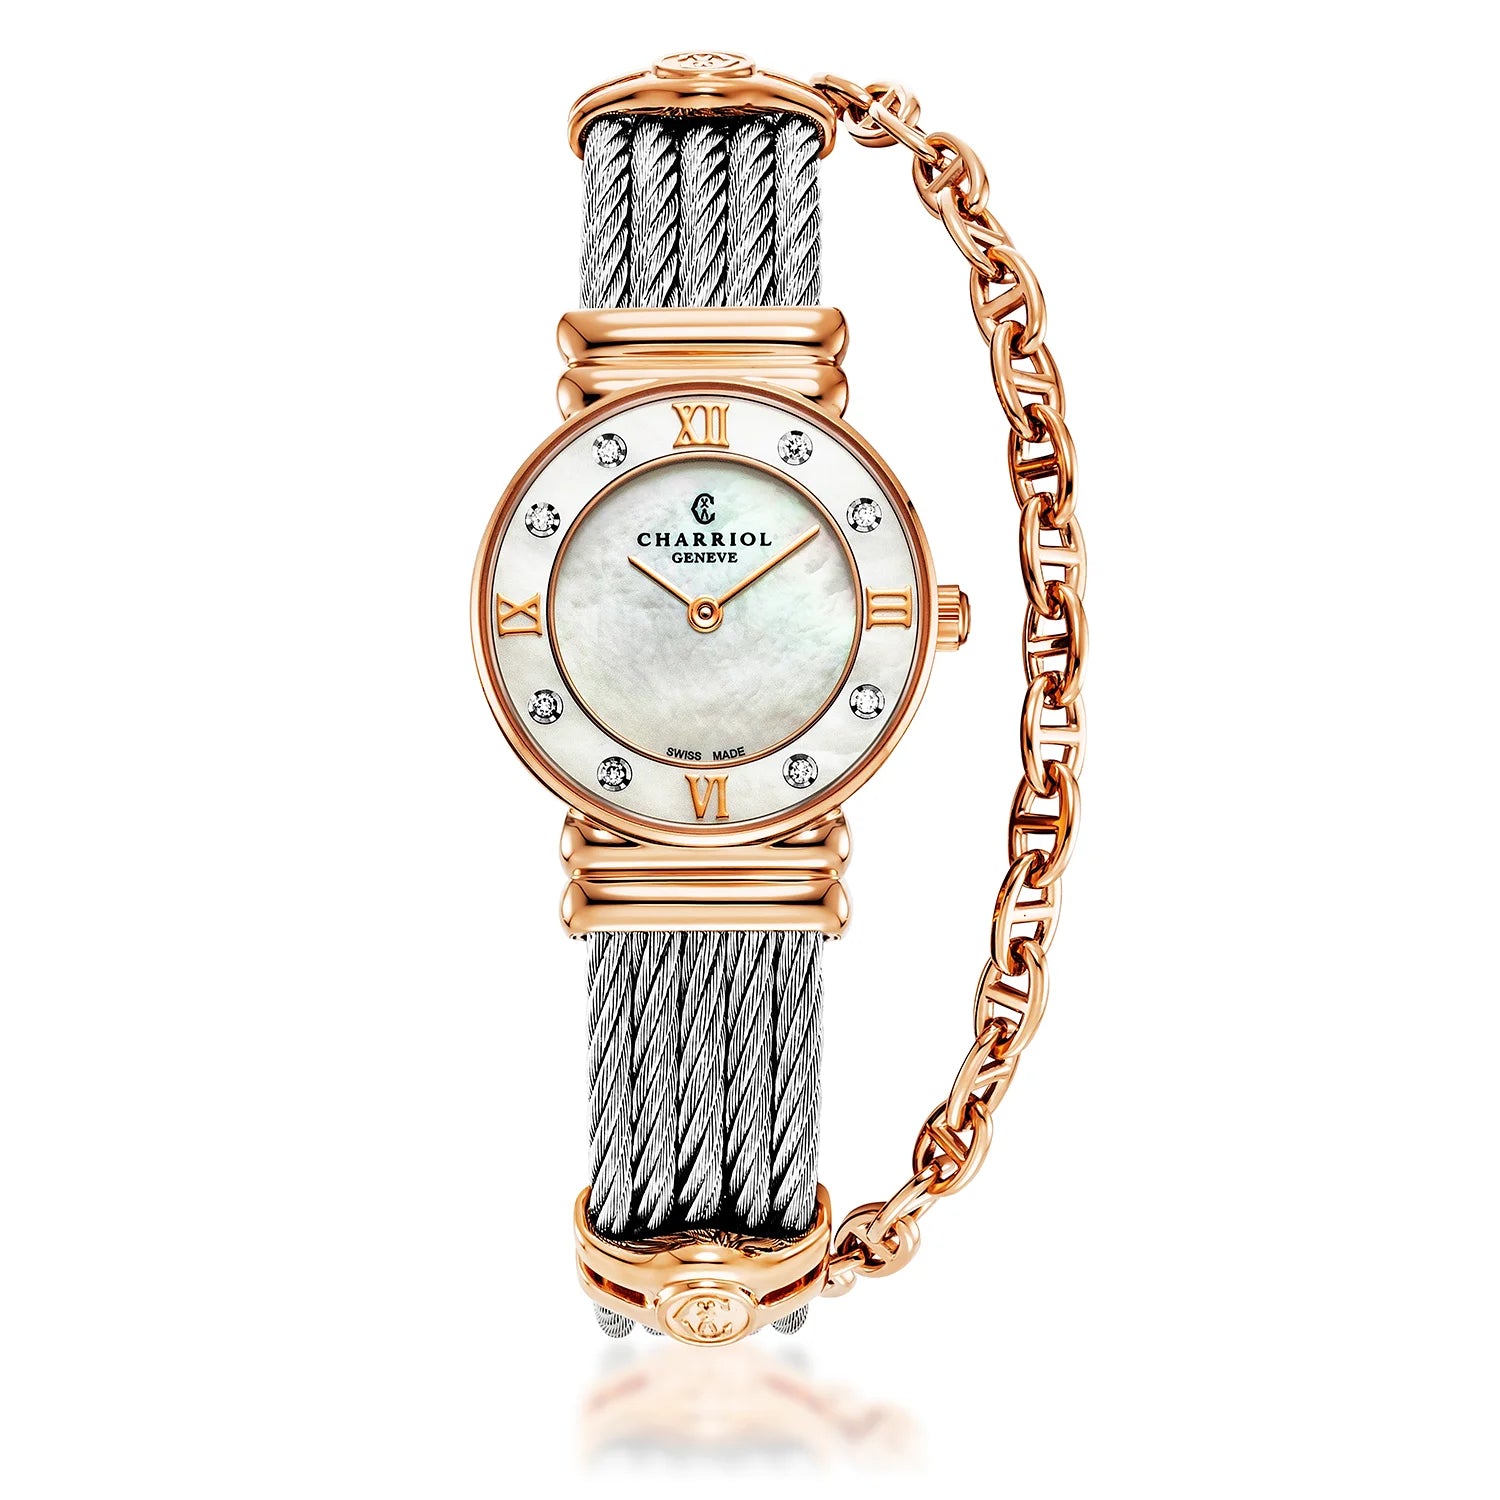 St Tropez Icon 24.5mm Watch Rose Gold PVD, Steel Cable, 8 Diamonds Bezel and White MOP dial - Charriol Geneve -  Watch